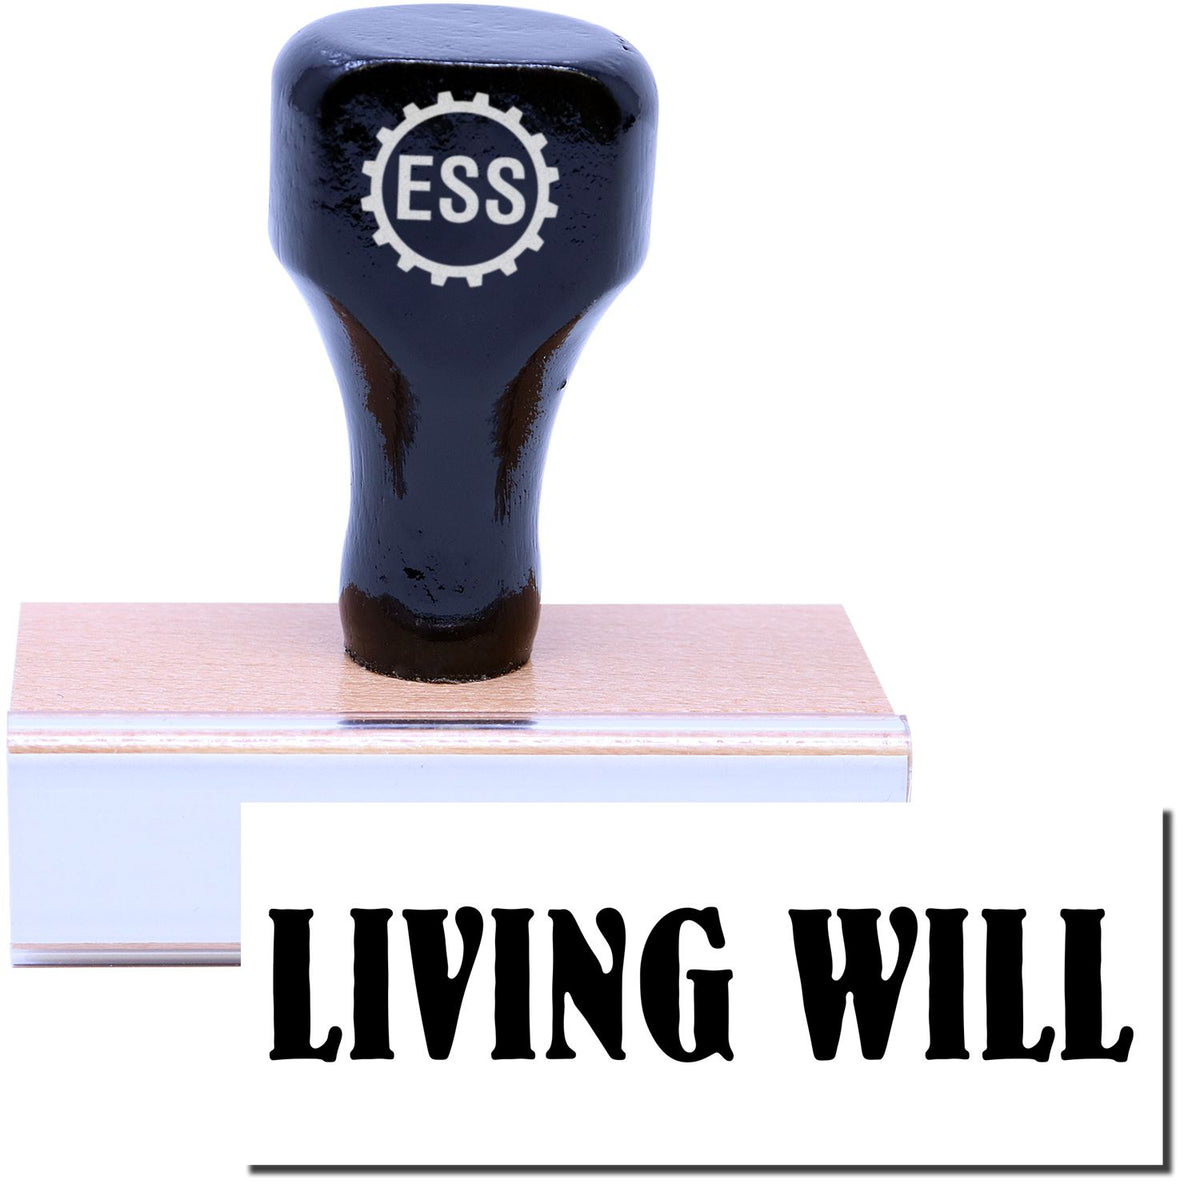 A stock office rubber stamp with a stamped image showing how the text &quot;LIVING WILL&quot; is displayed after stamping.